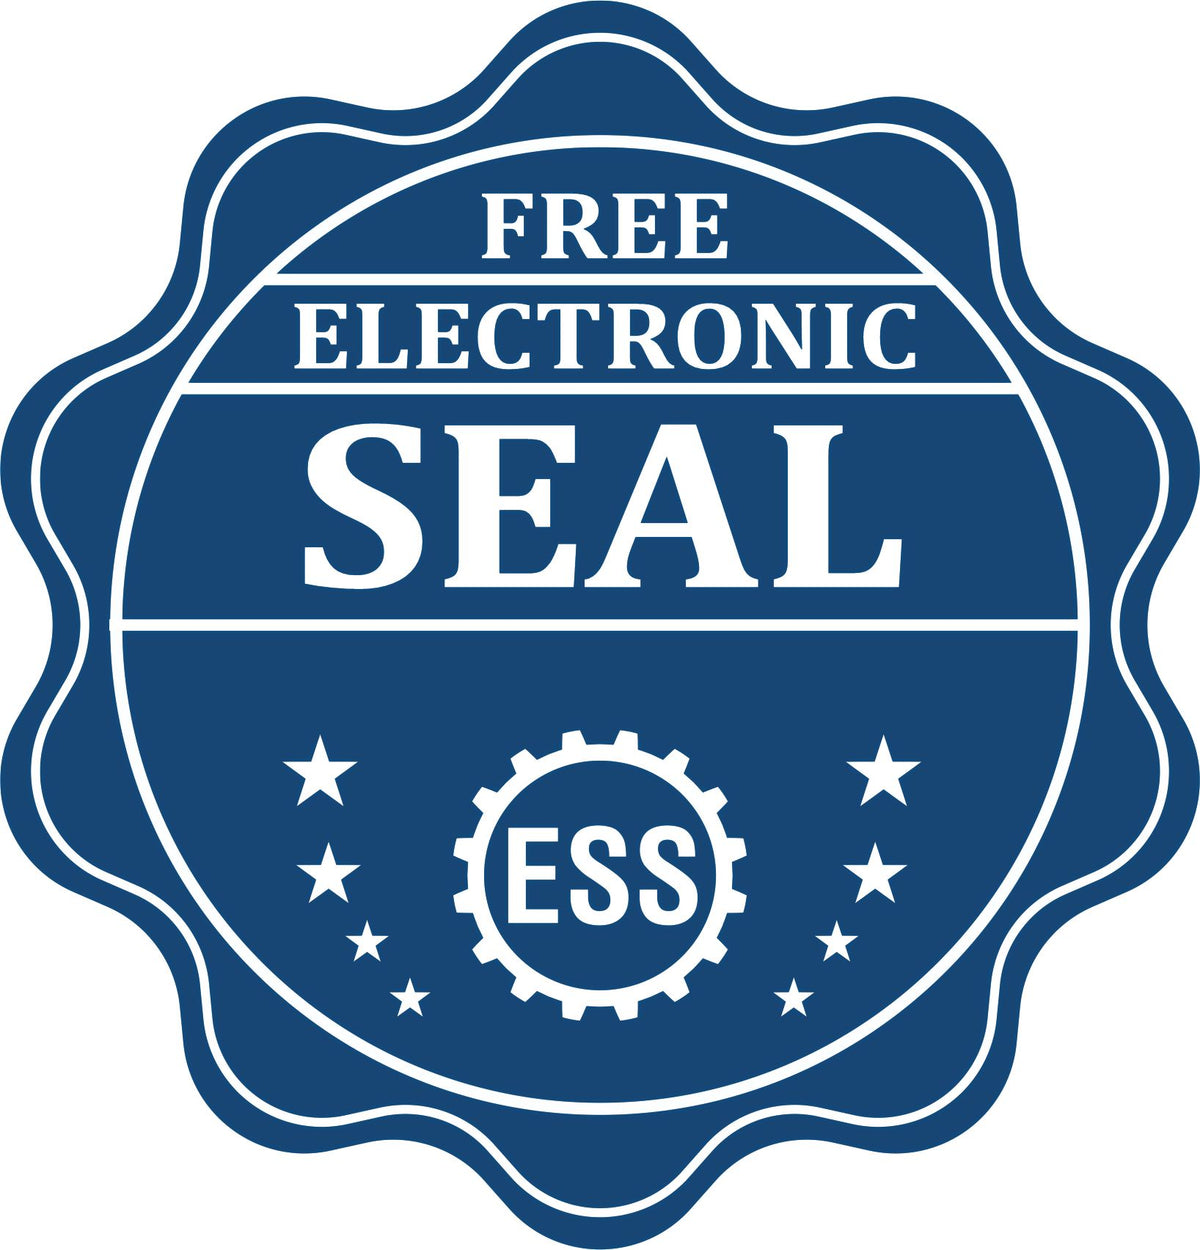 A badge showing a free electronic seal for the Long Reach New Jersey PE Seal with stars and the ESS gear on the emblem.